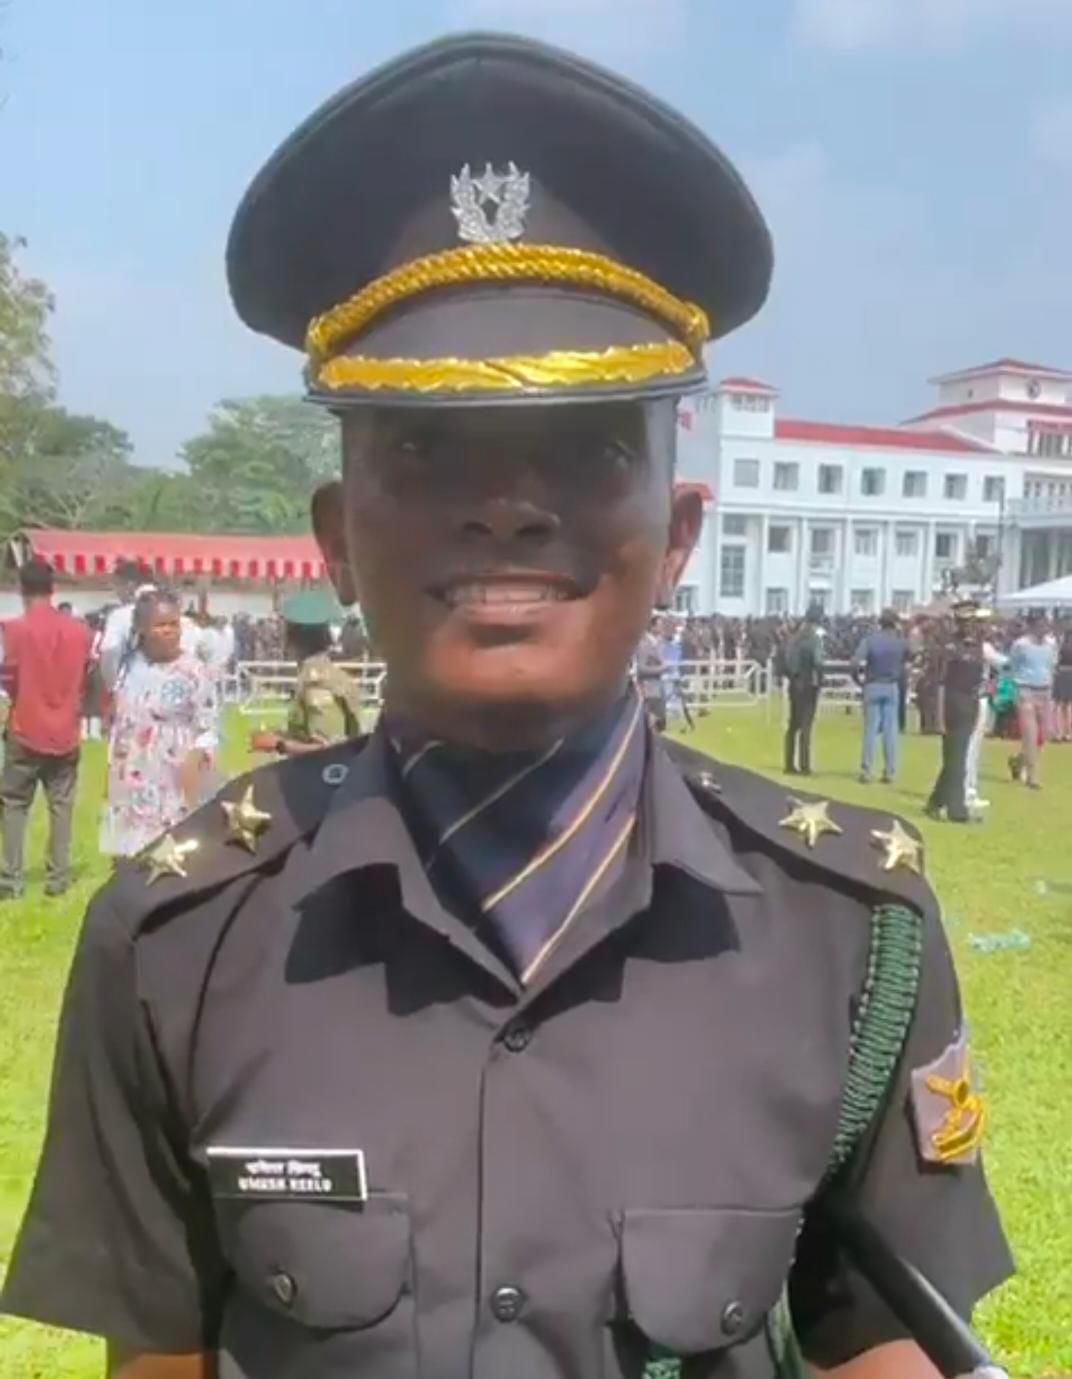 Mumbai lad rises from Dharavi slum to become Army officer